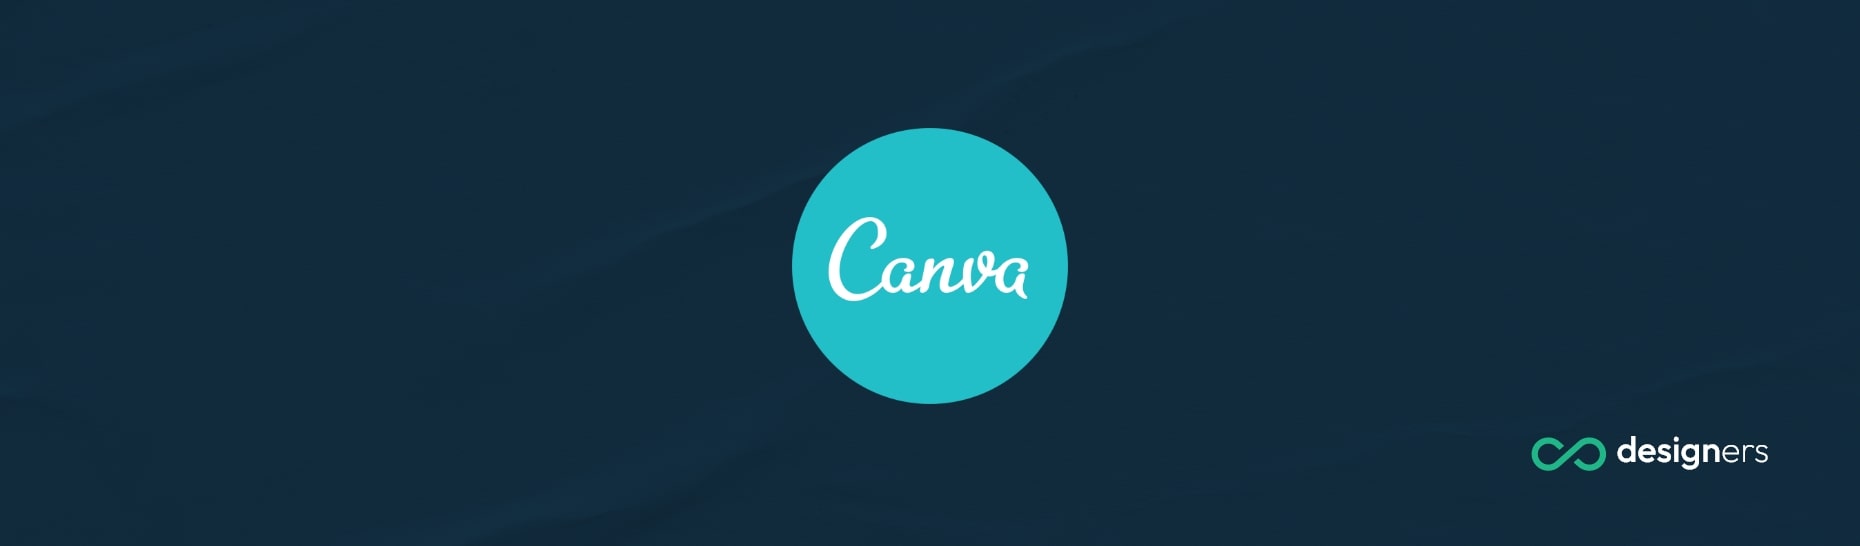 Are Canva Images Free?